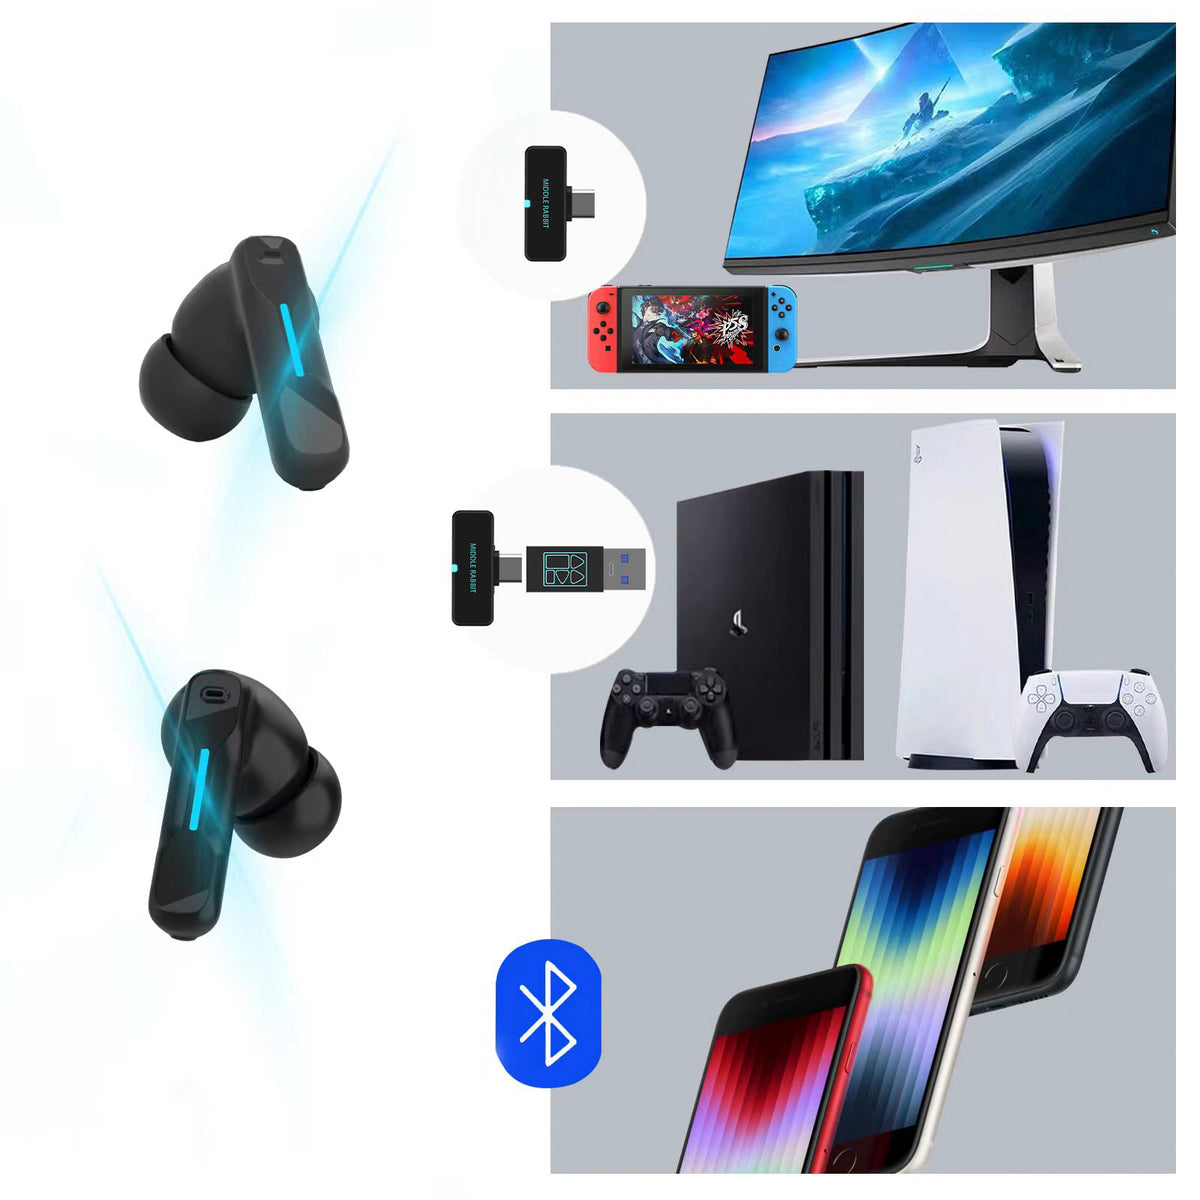 Middle Rabbit SW4 Wireless Gaming Earbuds for PC PS4 PS5 Switch Mobile - 2.4G Dongle & Bluetooth - 40ms Low Latency - Headphones with Built-in Microphone - 4 Mics PC Earbuds - PS4 PS5 Headset